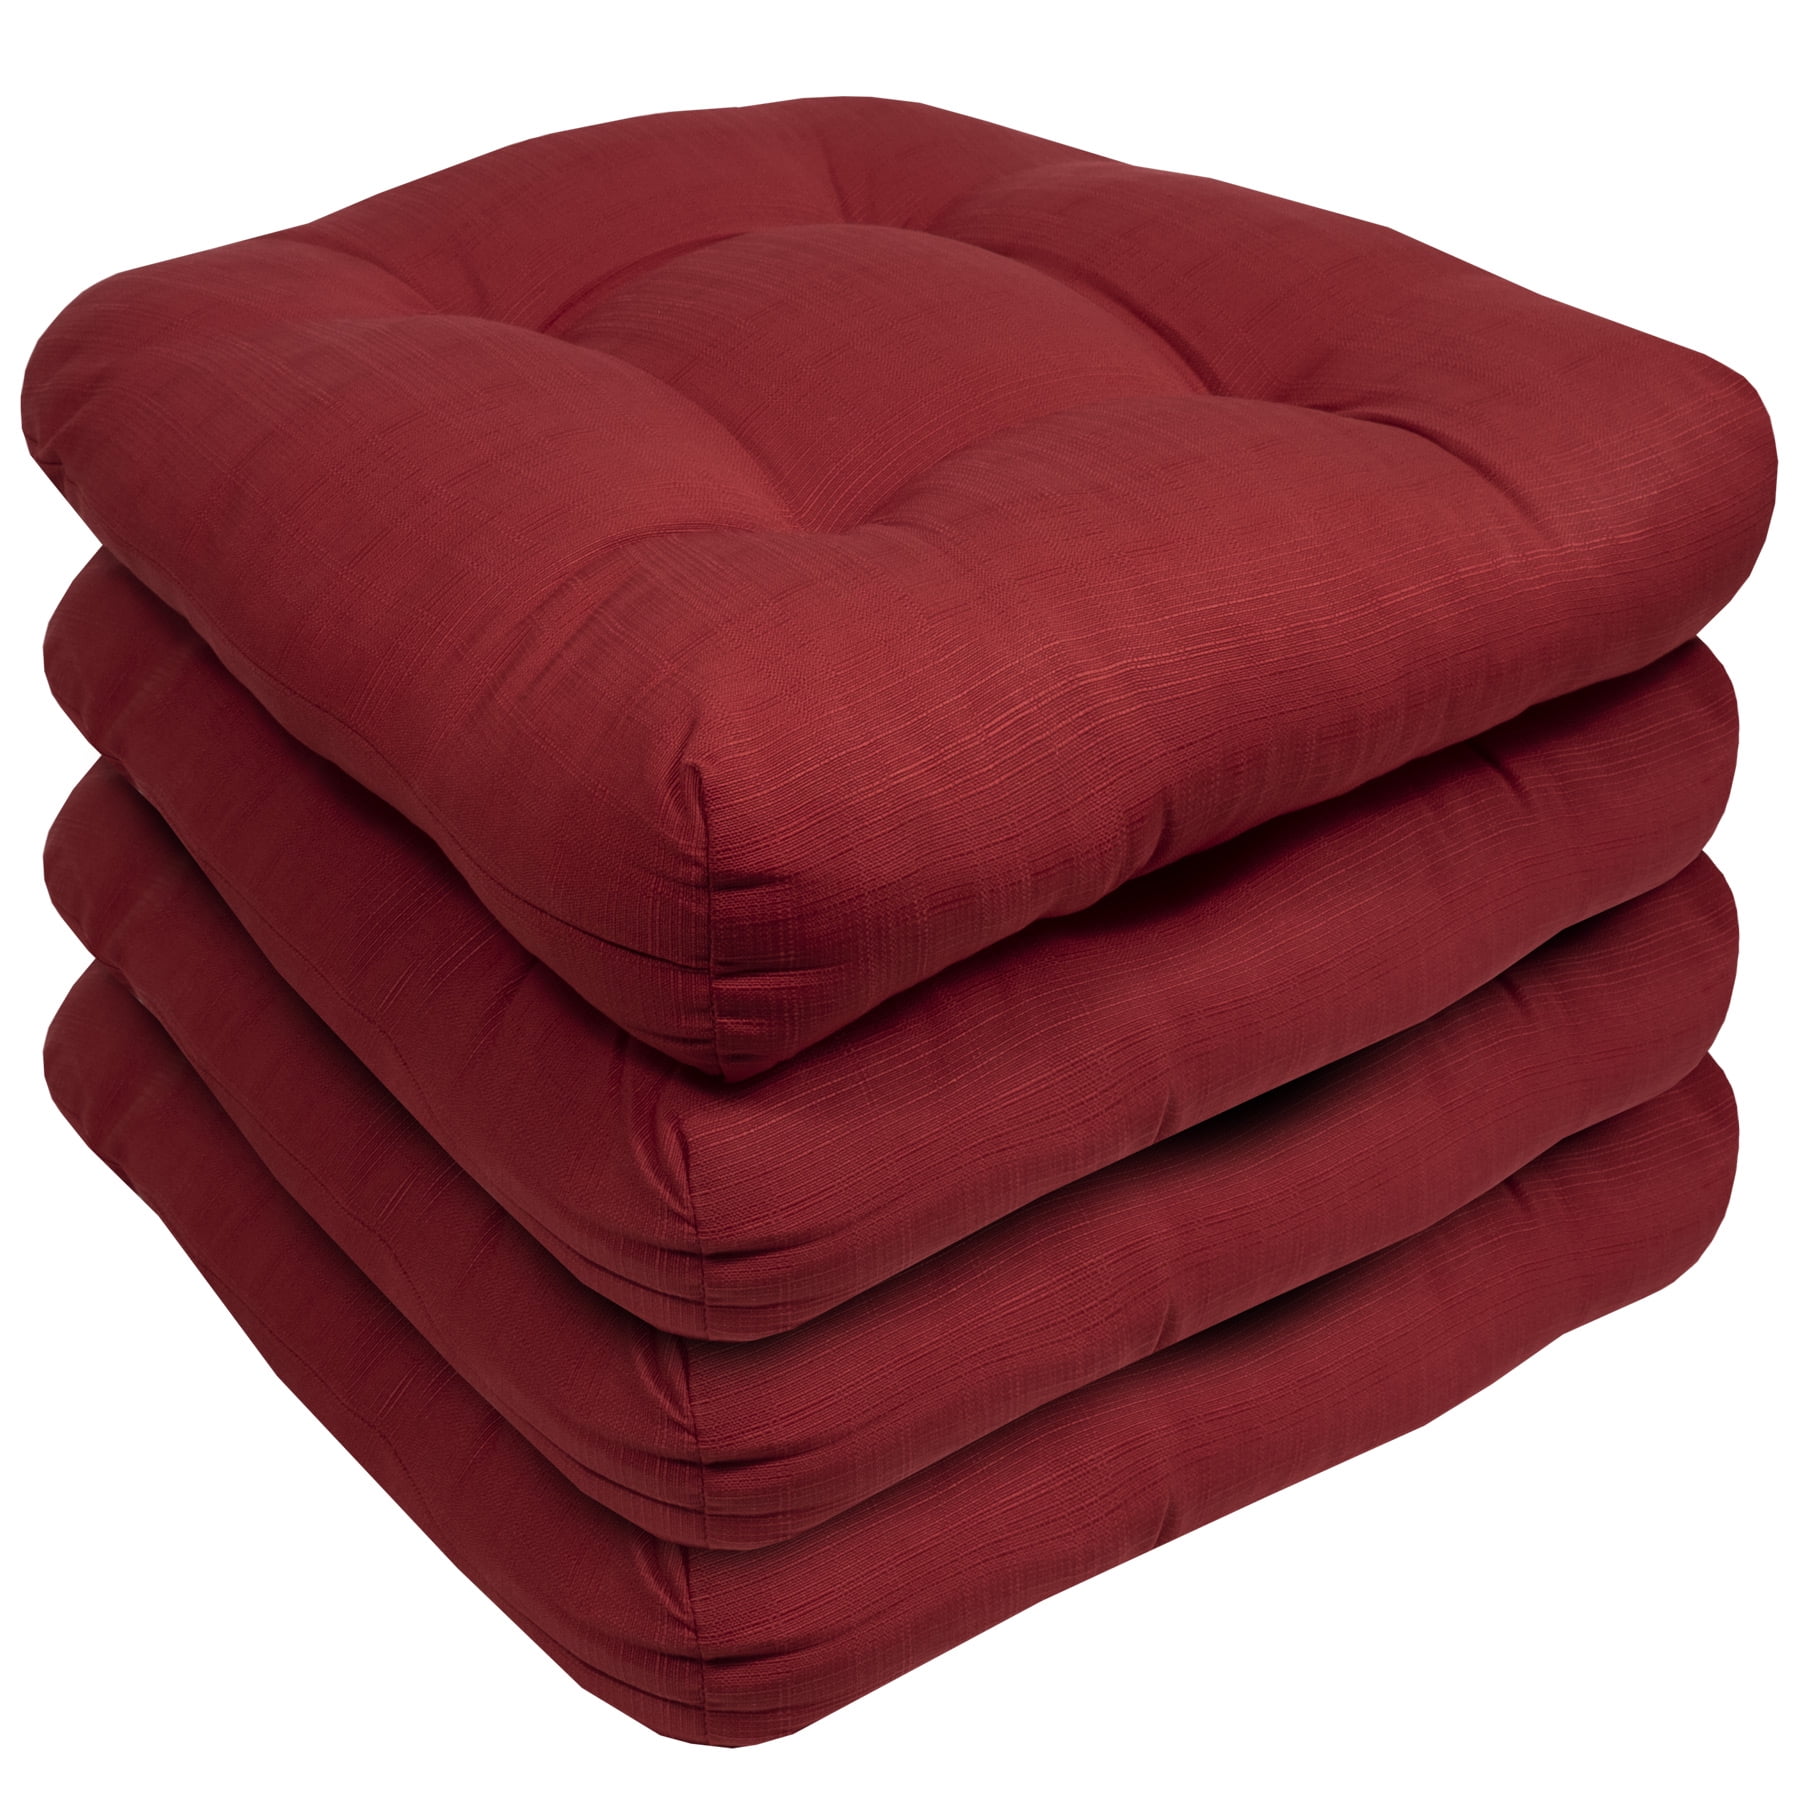 Indoor-Outdoor Reversible Patio Seat Cushion Pad 4 Pack - Red 19" x 19